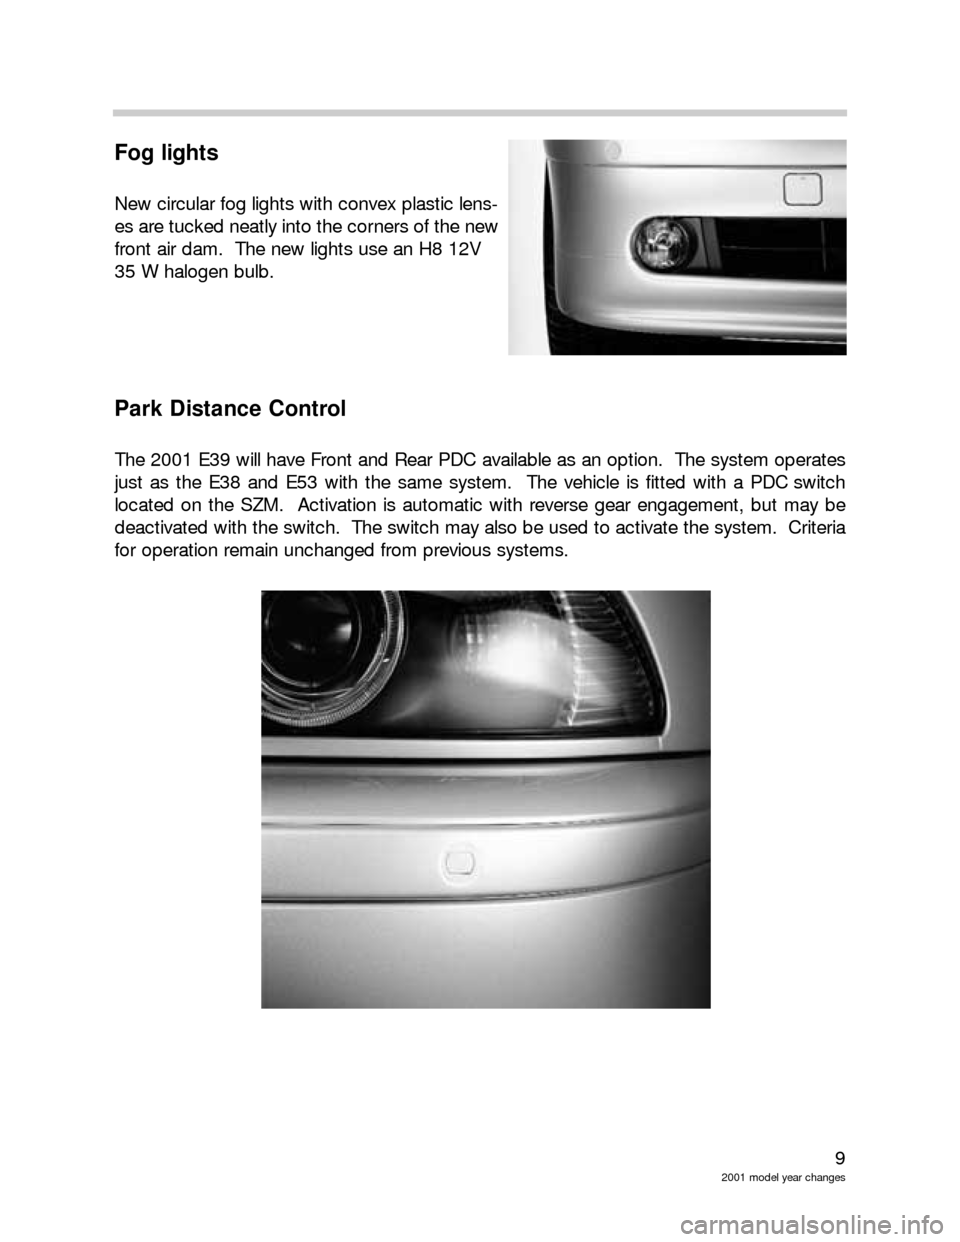 BMW X5 2002 E53 Model Yar Changes 9
2001 model year changes
Fog lights
New circular fog lights with convex plastic lens-
es are tucked neatly into the corners of the new
front air dam.  The new lights use an H8 12V 
35 W halogen bulb.